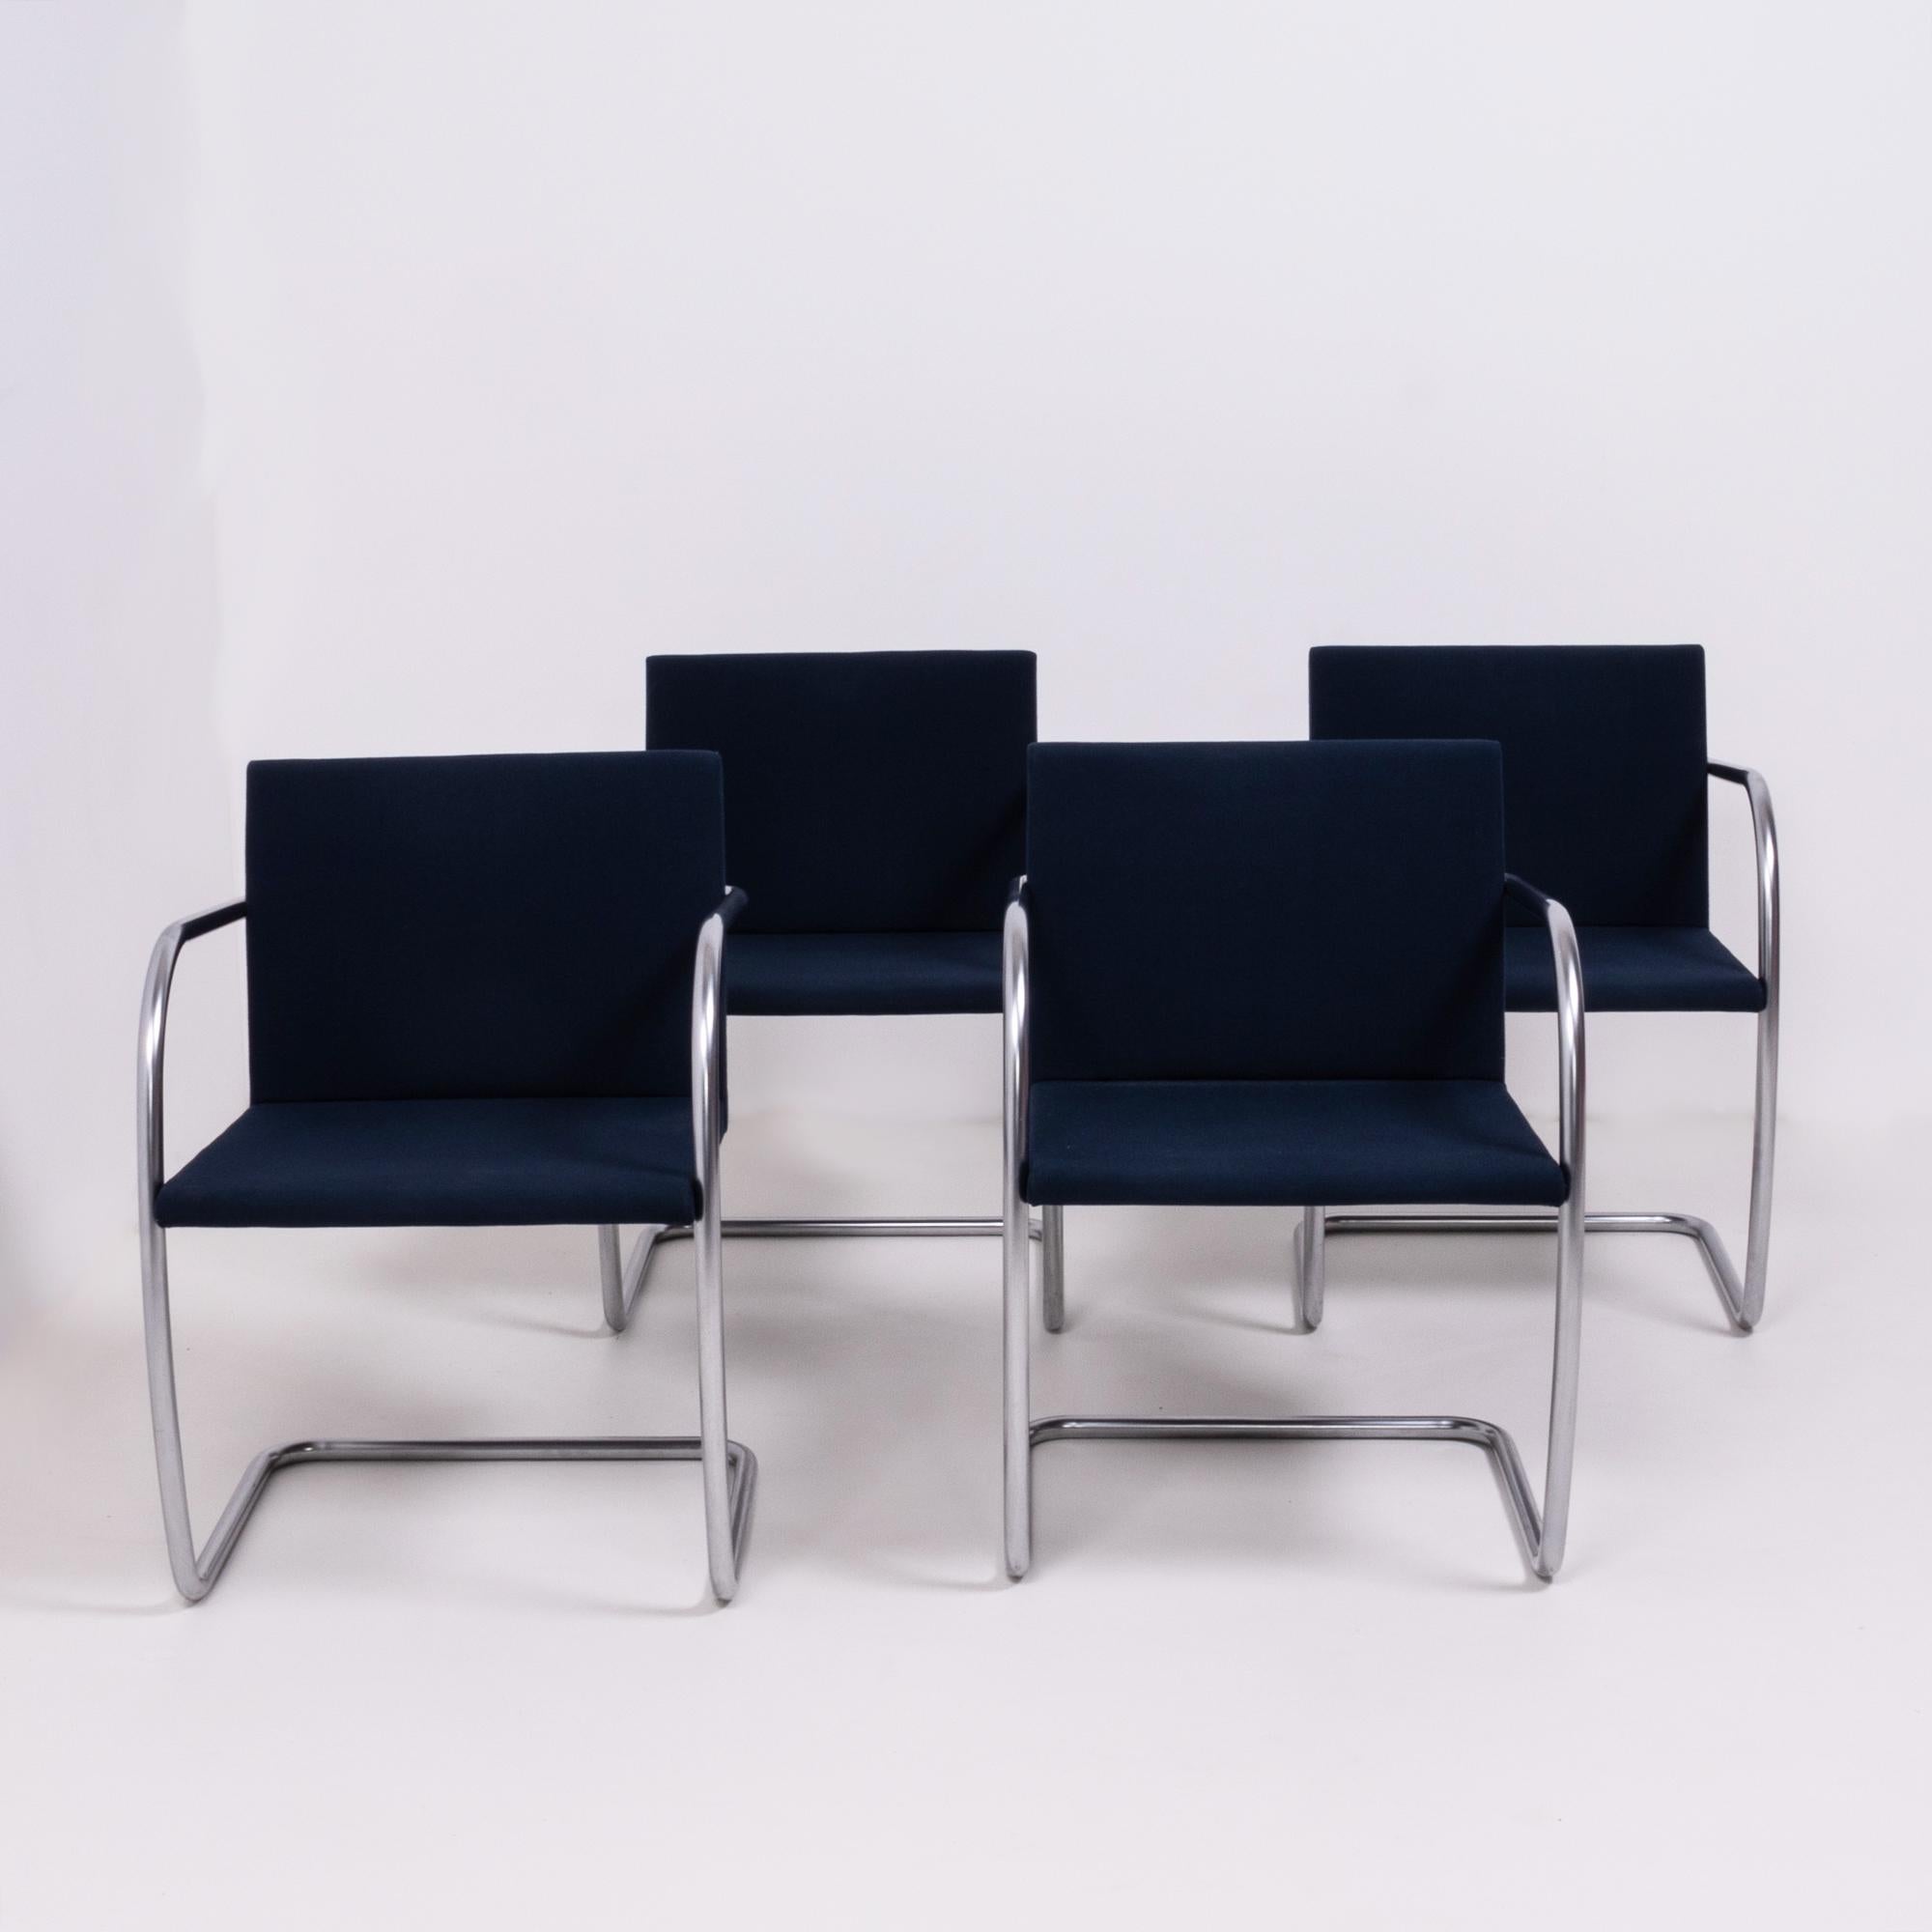 Originally designed by Mies van der Rohe in 1930 for his house in Brno, Czech Republic, the Brno chair remains a design icon.

Sleek and simple, this set of four cantilever chairs are upholstered in navy fabric and feature tubular chrome frames